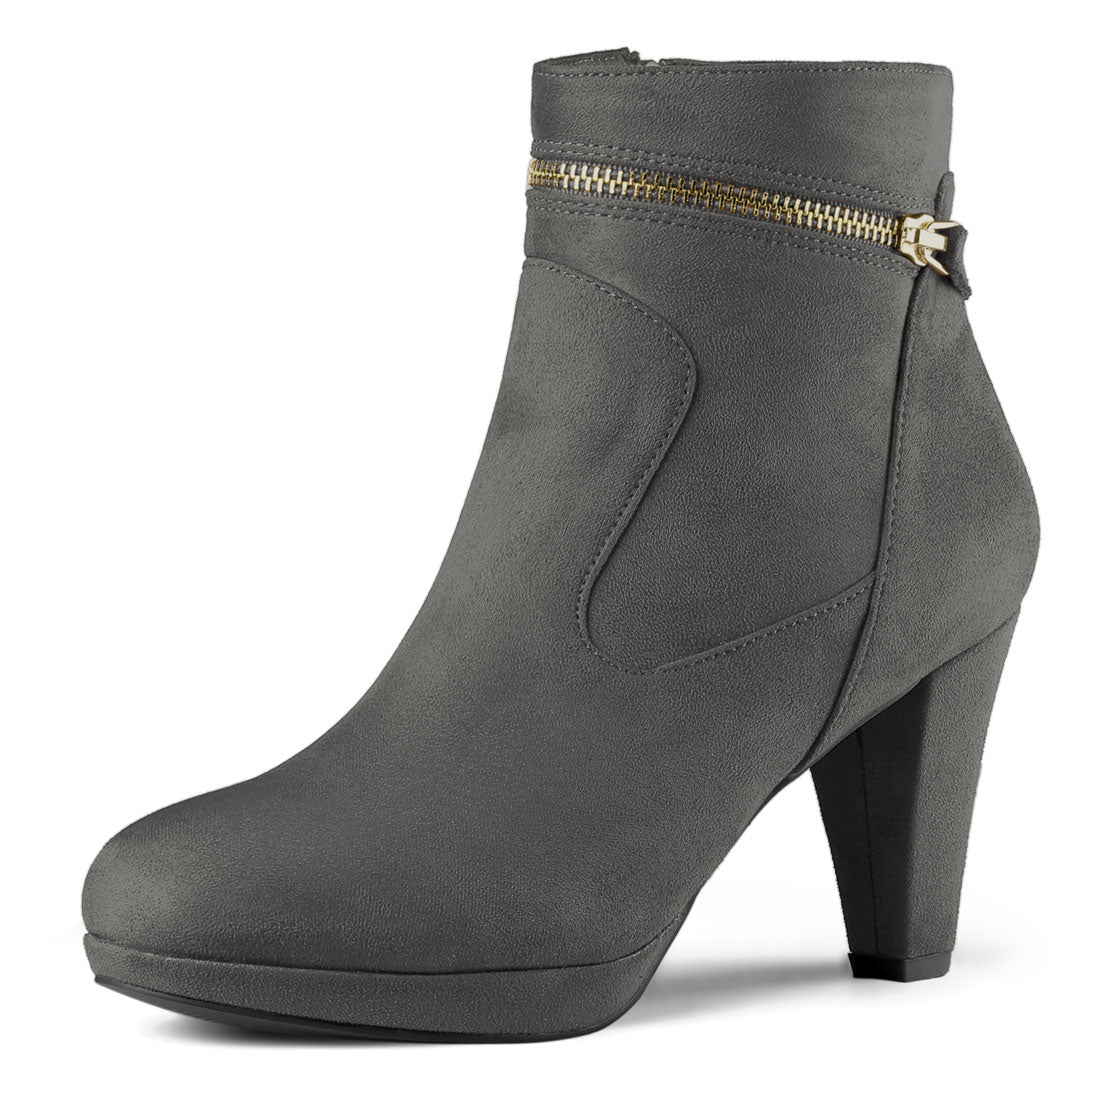 Allegra K Faux Suede Round Toe Ankle Mid Block Heel Boots